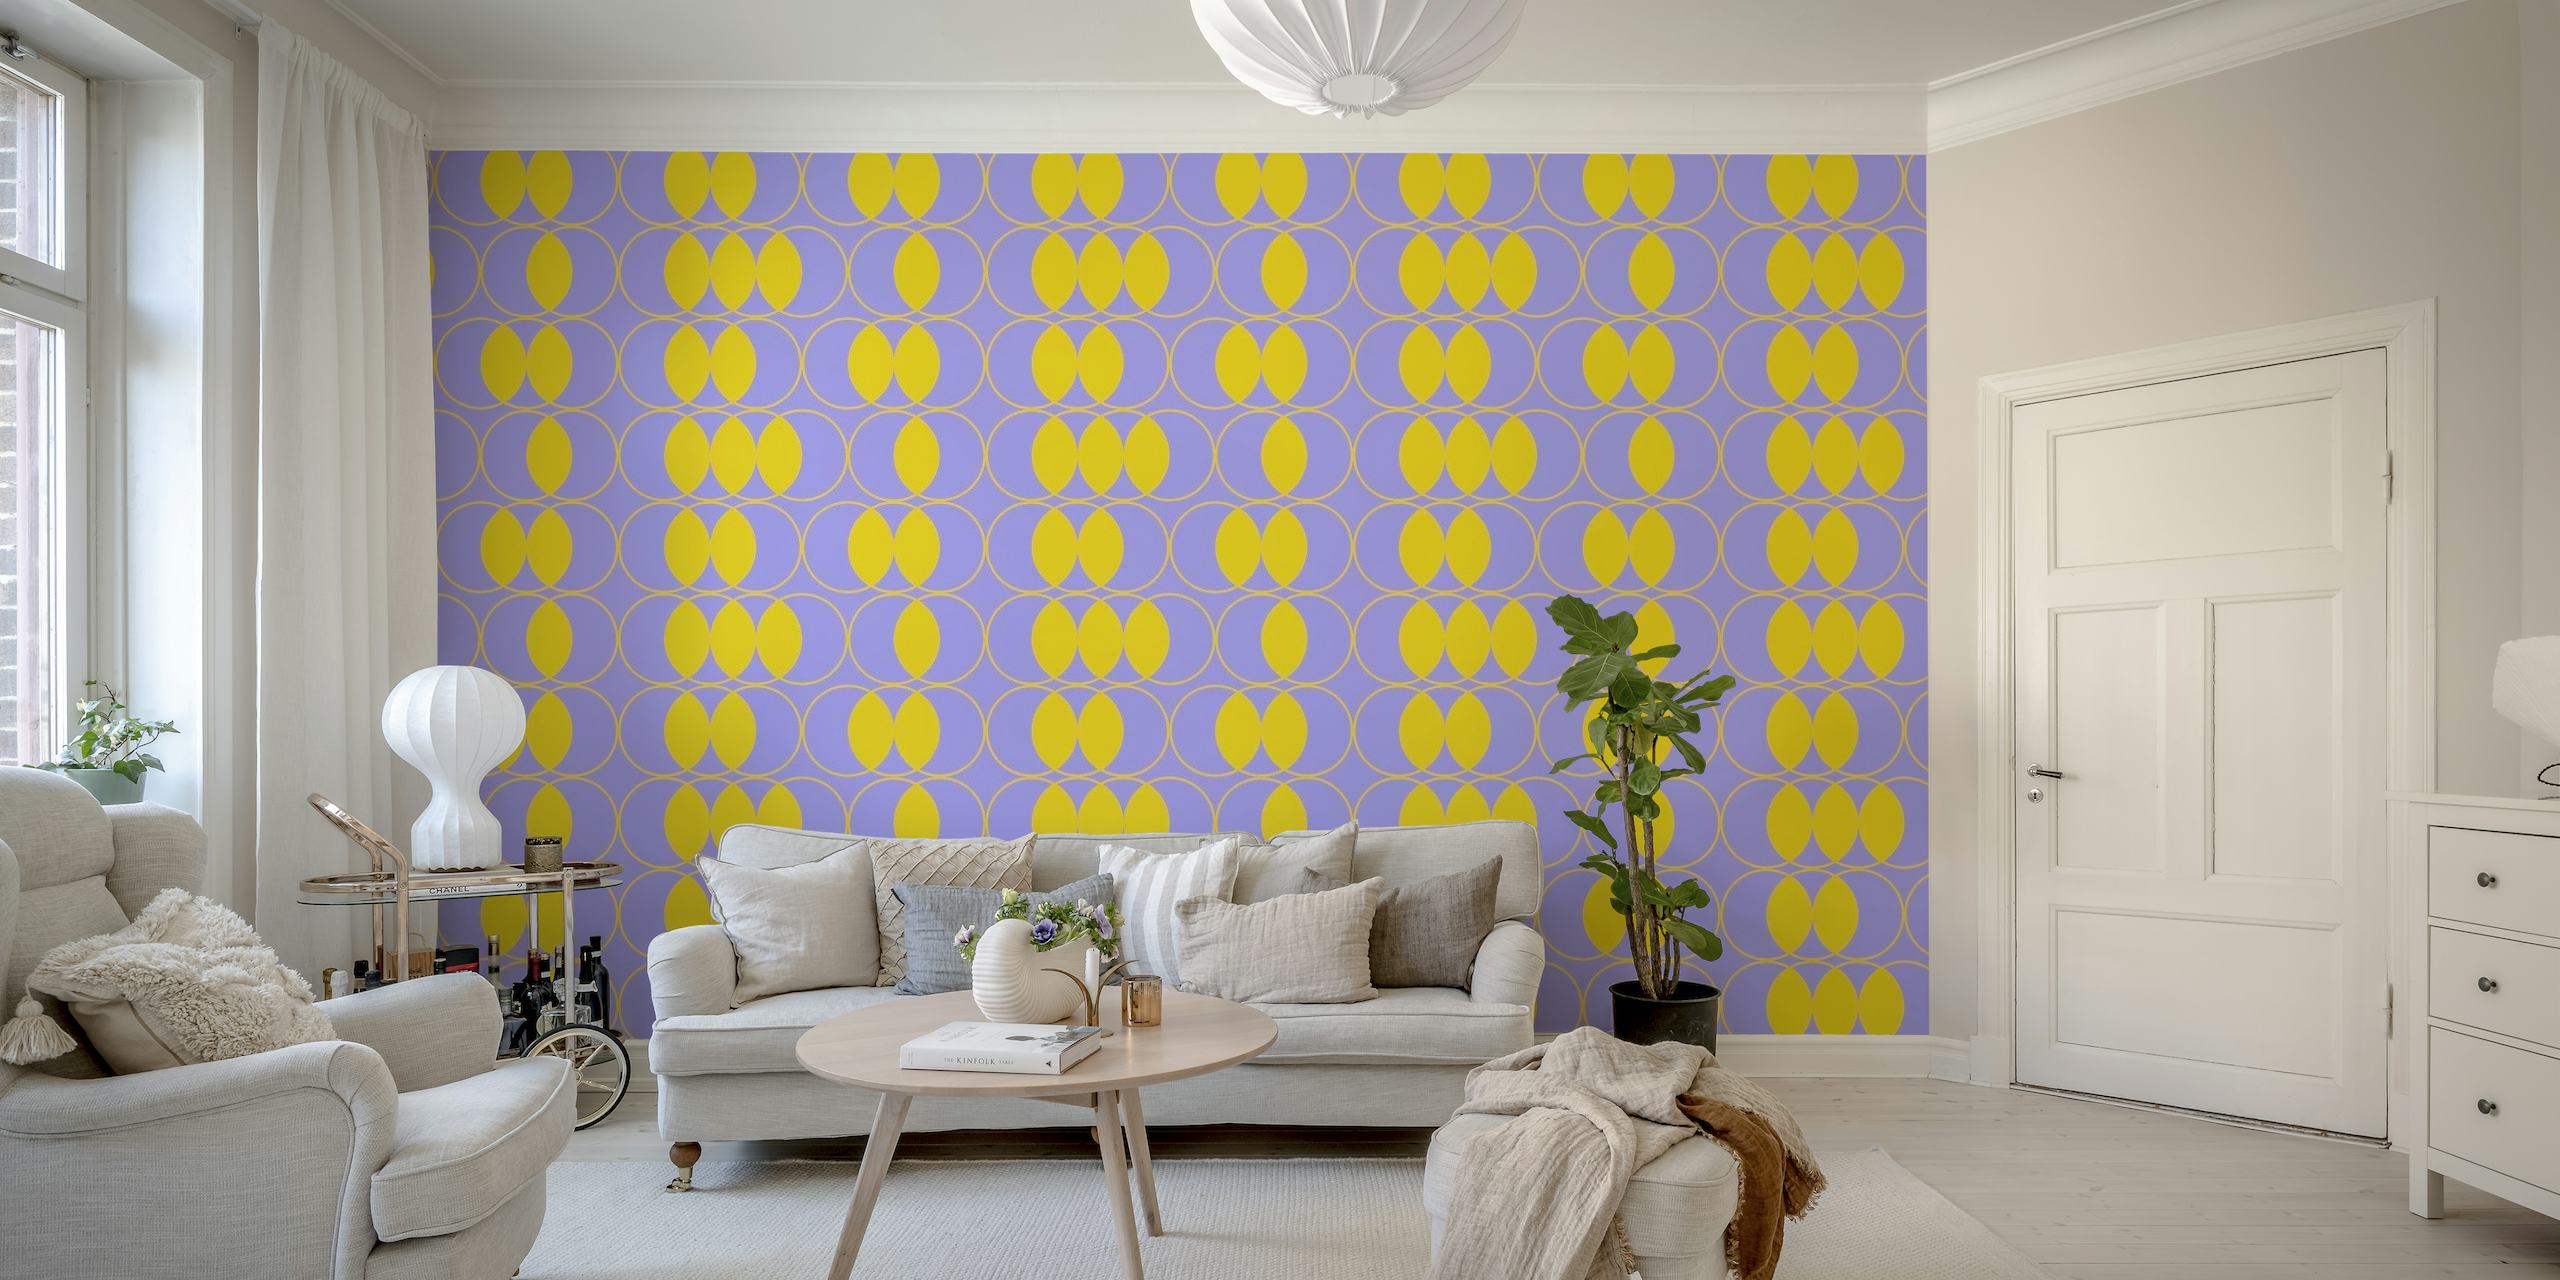 Modern Retro Mosaic LDP01 wall mural with geometric pattern in shades of purple and yellow